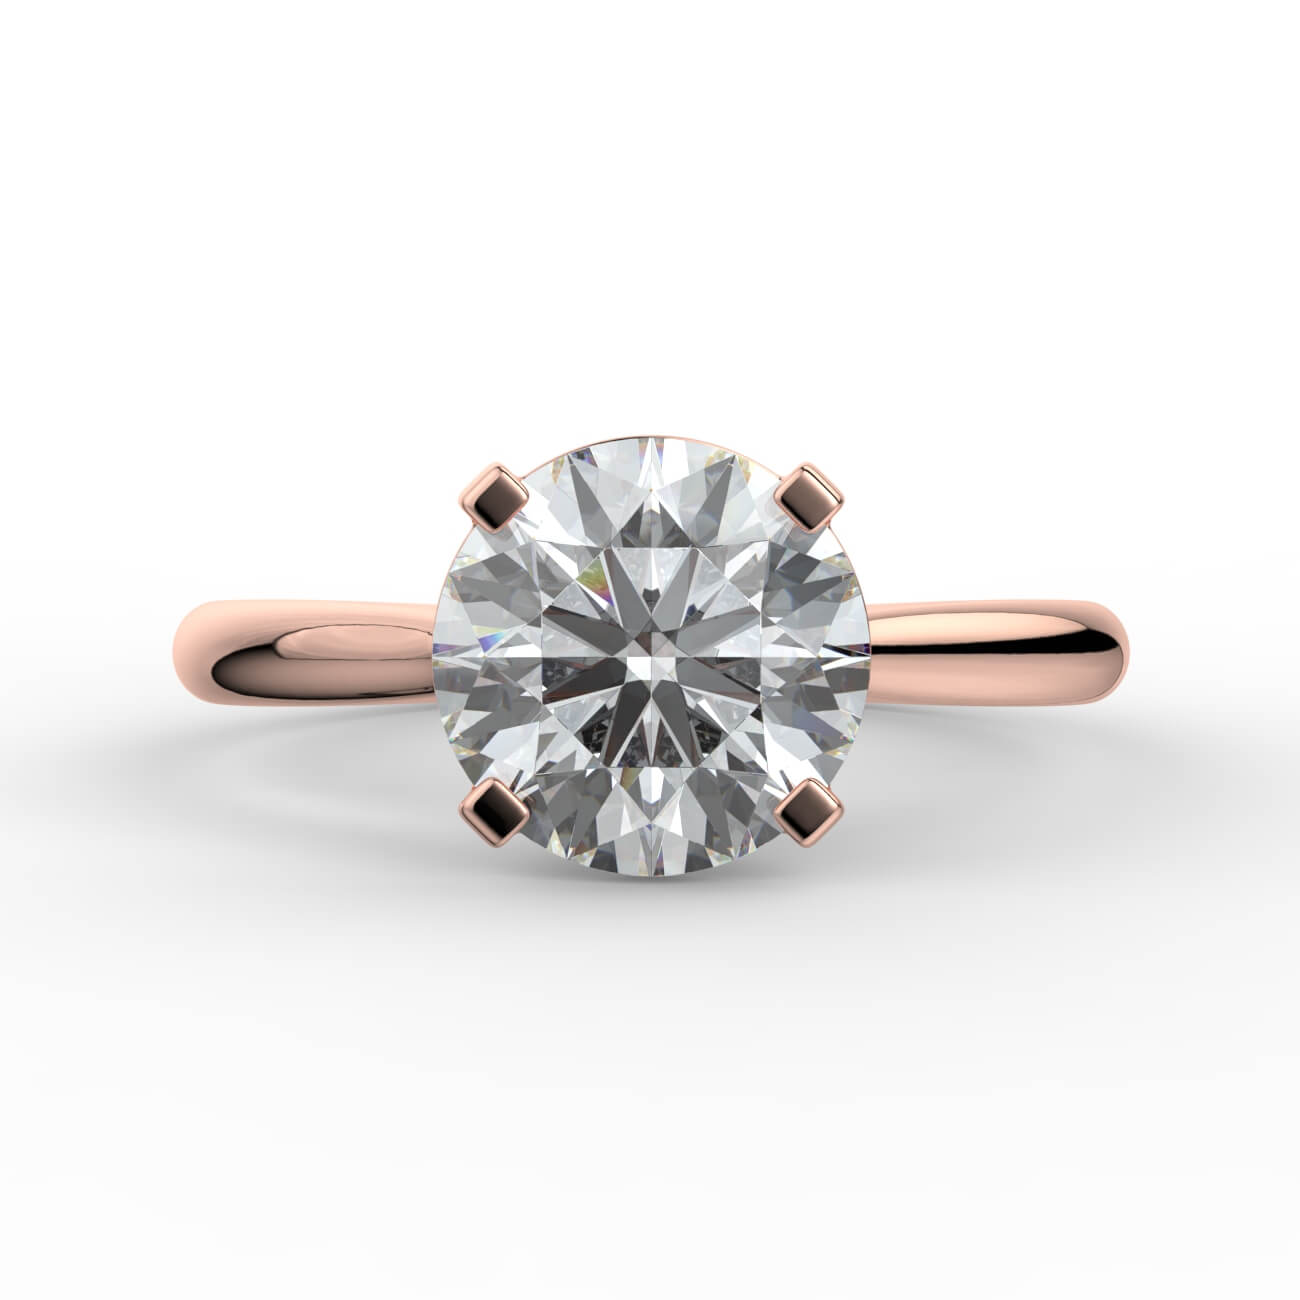 Round brilliant cut diamond cathedral engagement ring in rose gold – Australian Diamond Network